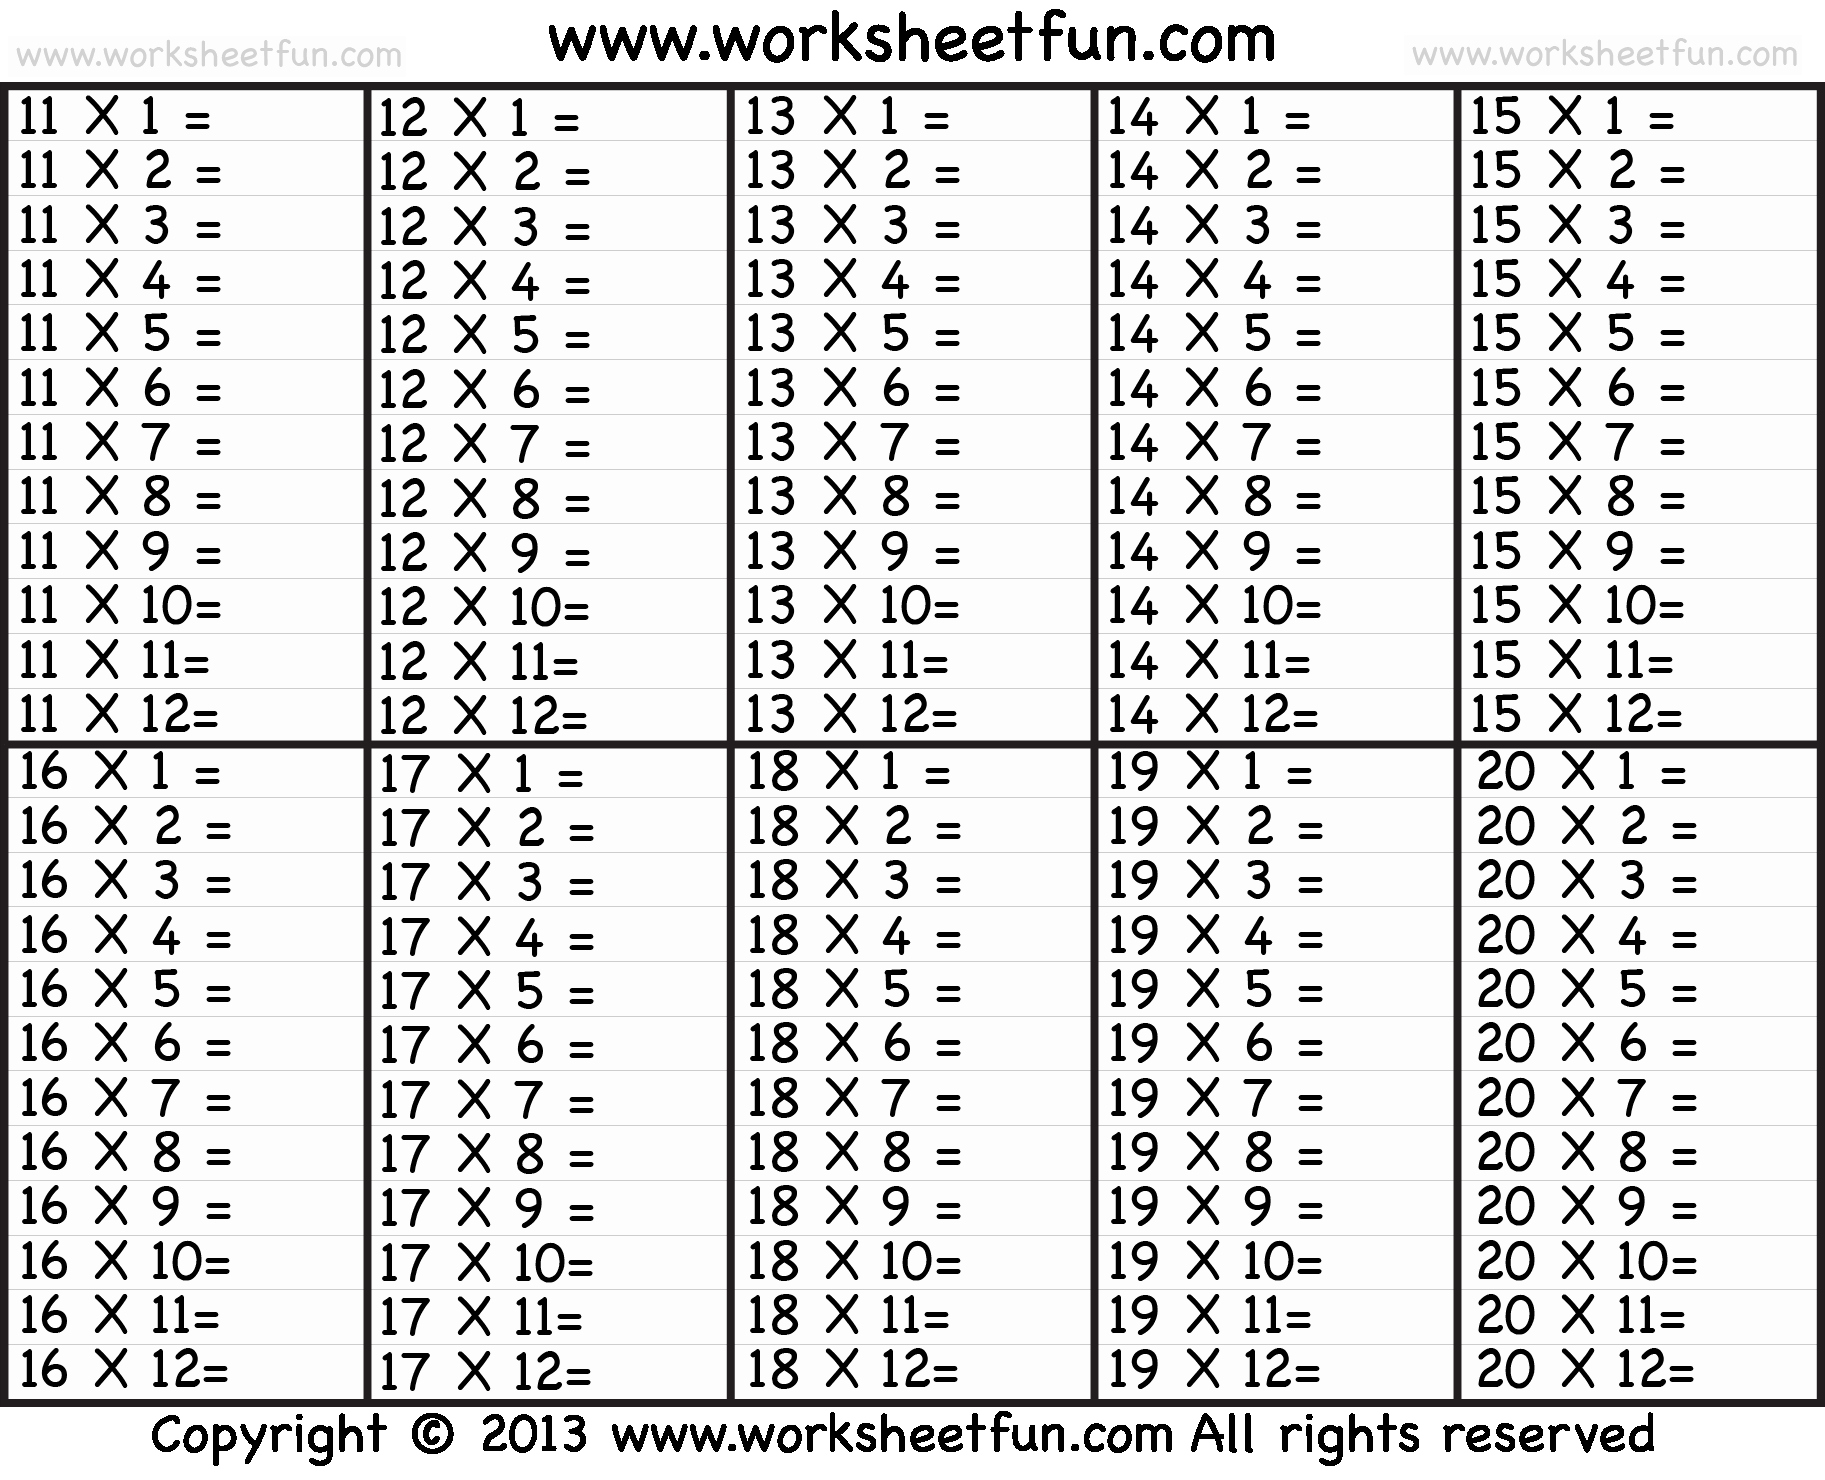 Answer Sheet Template 1-100 Best Of Times Table – 2 12 Worksheets – 1 2 3 4 5 6 7 8 9